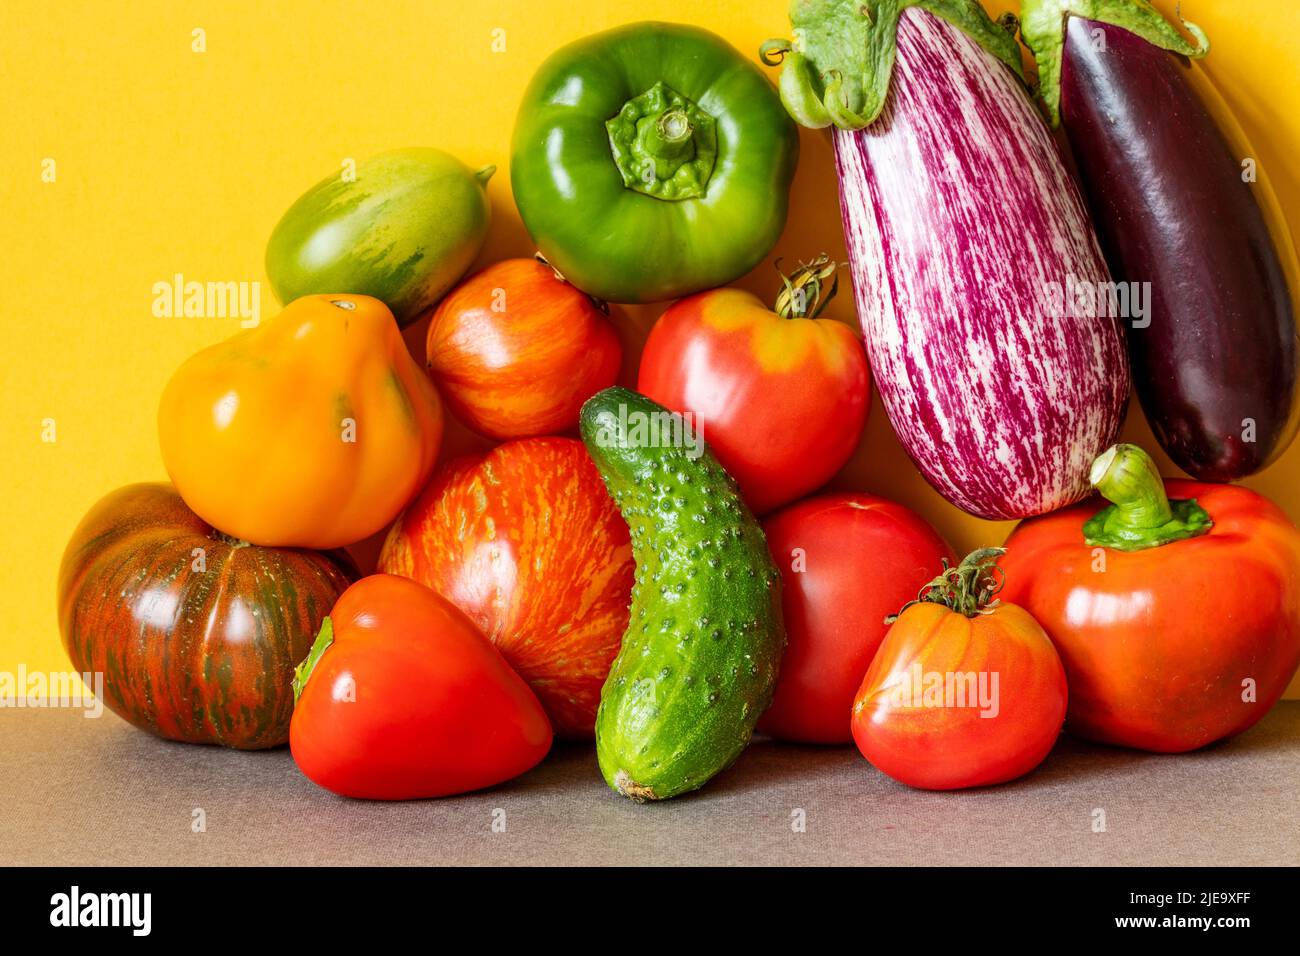 Organic vegetables still life scene. Farm aubergine eggplants, tomatoes of various grade, bell peppers and cucumber on a yellow gray background. Stock Photo